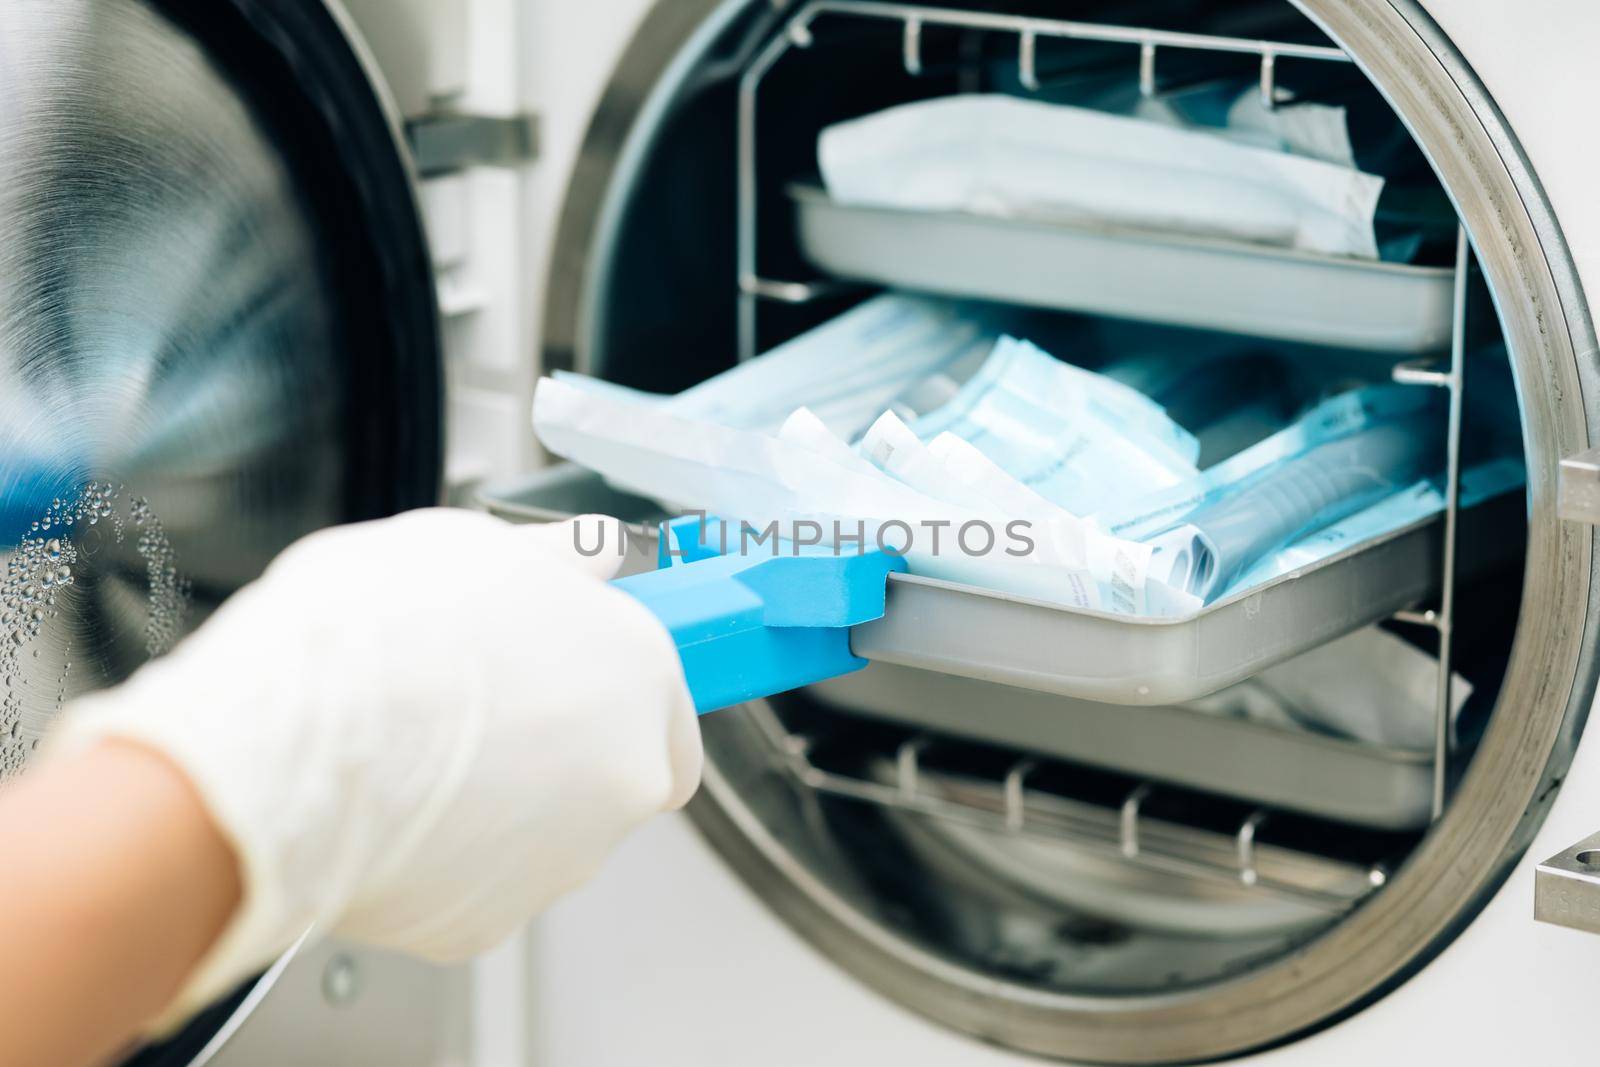 Tools sterilization, bacterial purification and disinfection in dental clinic. Nurse putting instruments in special craft paper bags into autoclave for processing. Modern laboratory equipment.